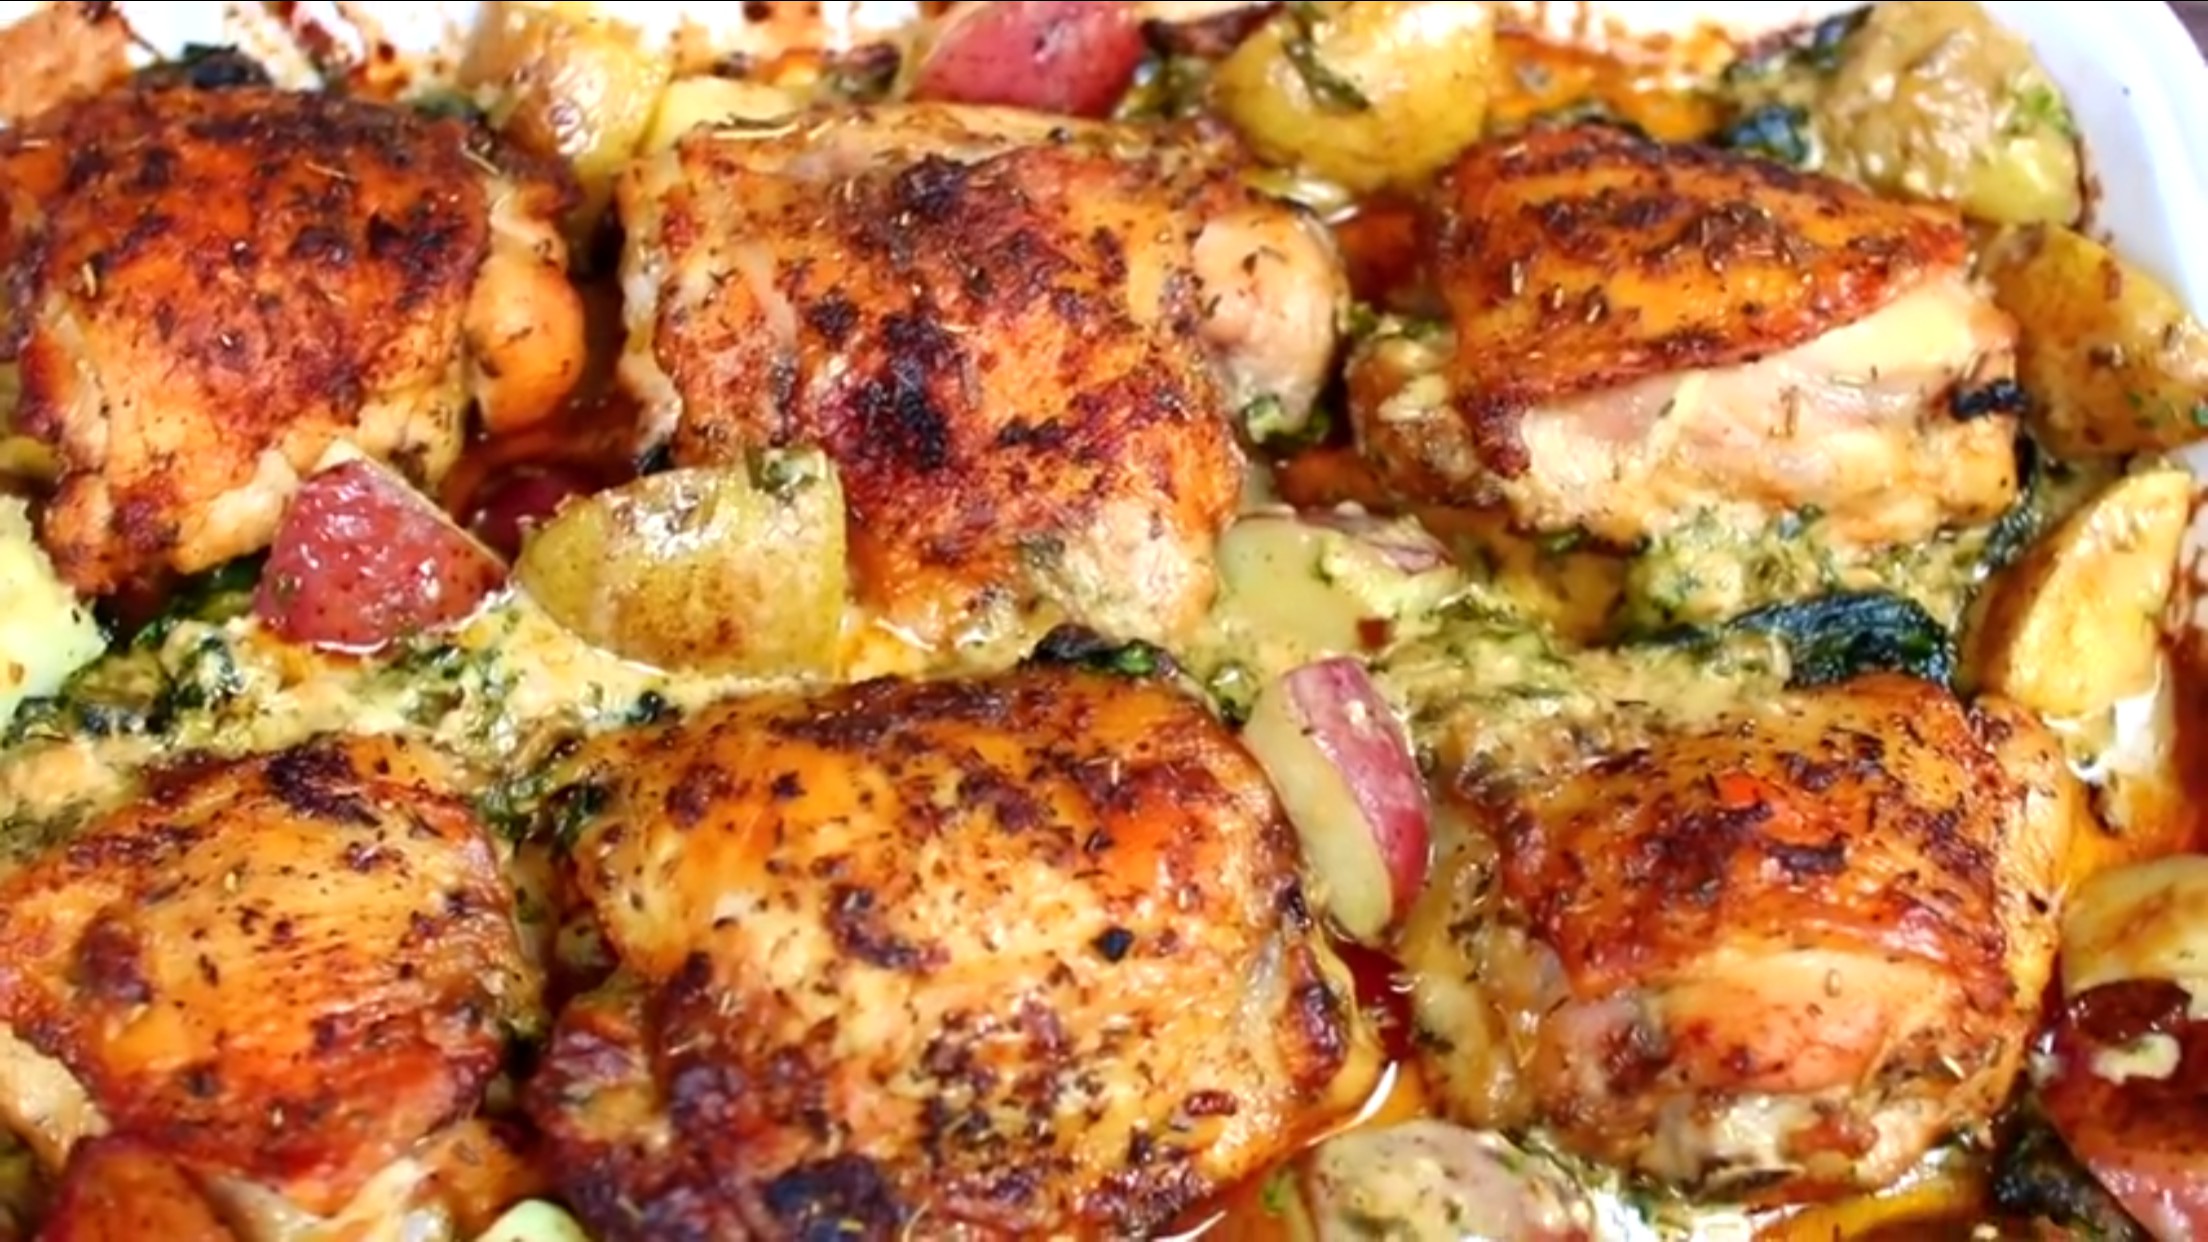 Creamy Garlic Butter Chicken and Potatoes | None | Copy Me That